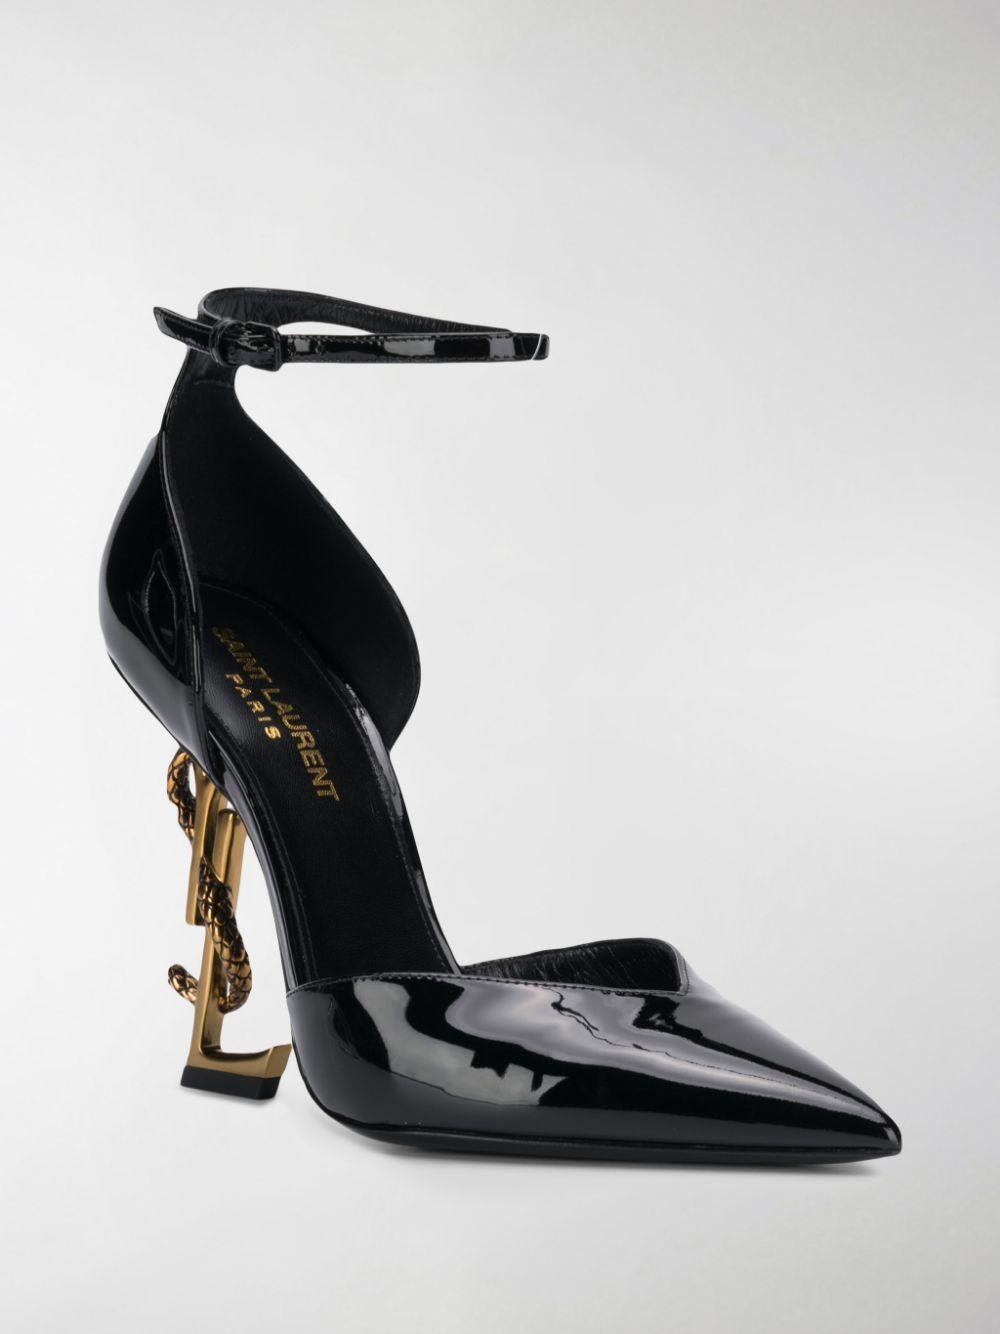 Saint Laurent Black Patent Leather Opyum D'Orsay YSL Logo Heel Pump

Saint Laurent douses footwear with a liberal dose of rebellion. Classic pointy pumps are sharpened via architectural sculpting, patent finishes lend new luster, and the inimitable